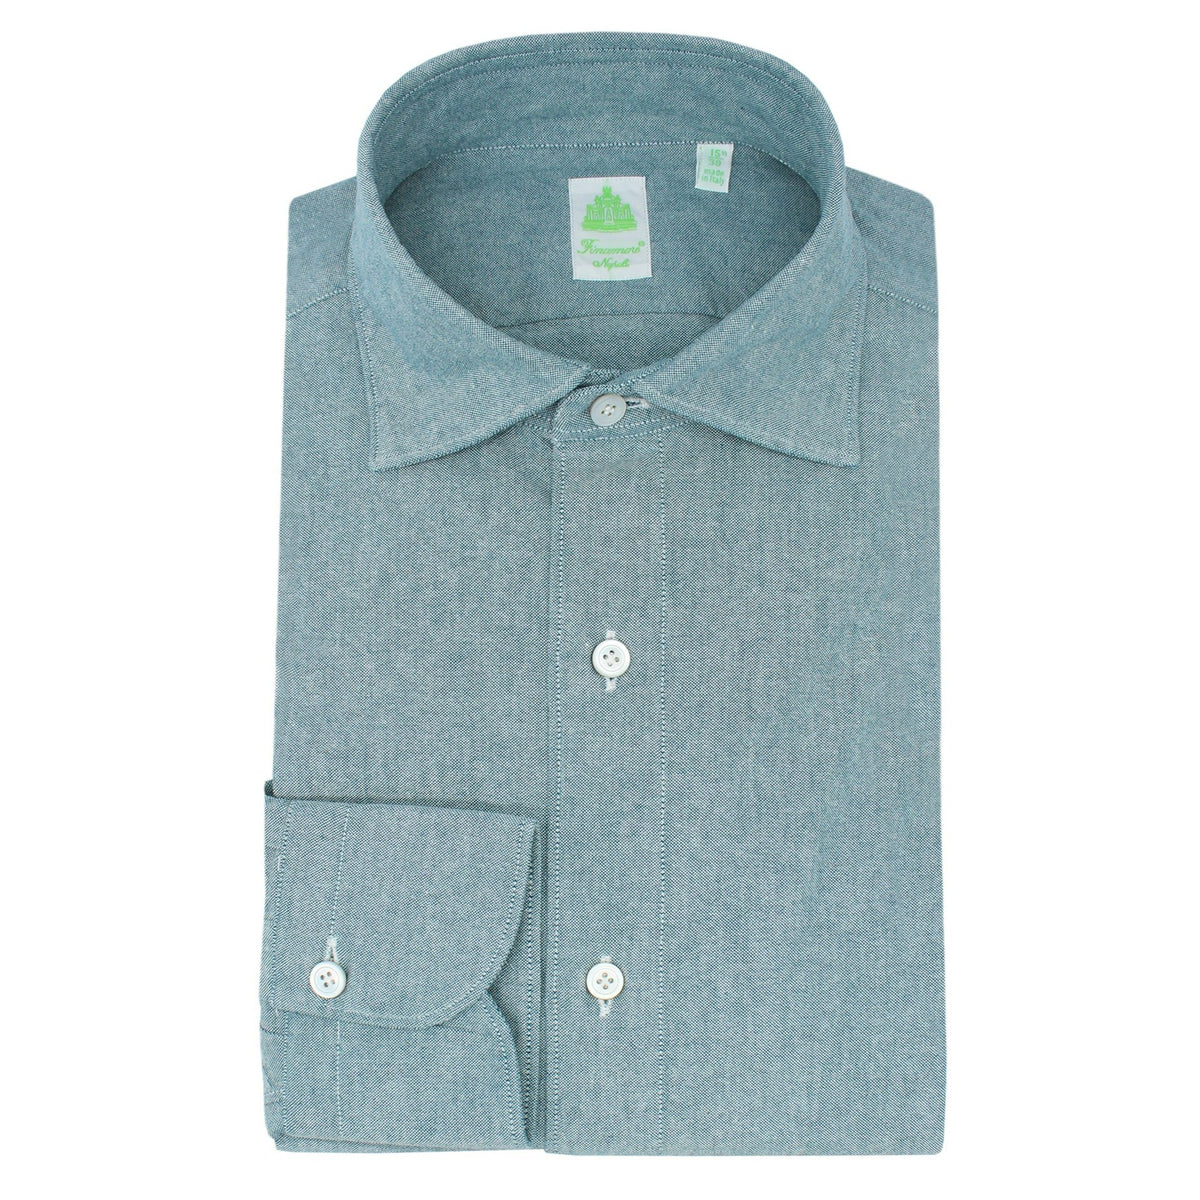 Tokyo slim fit sport shirt in light blue or red cotton